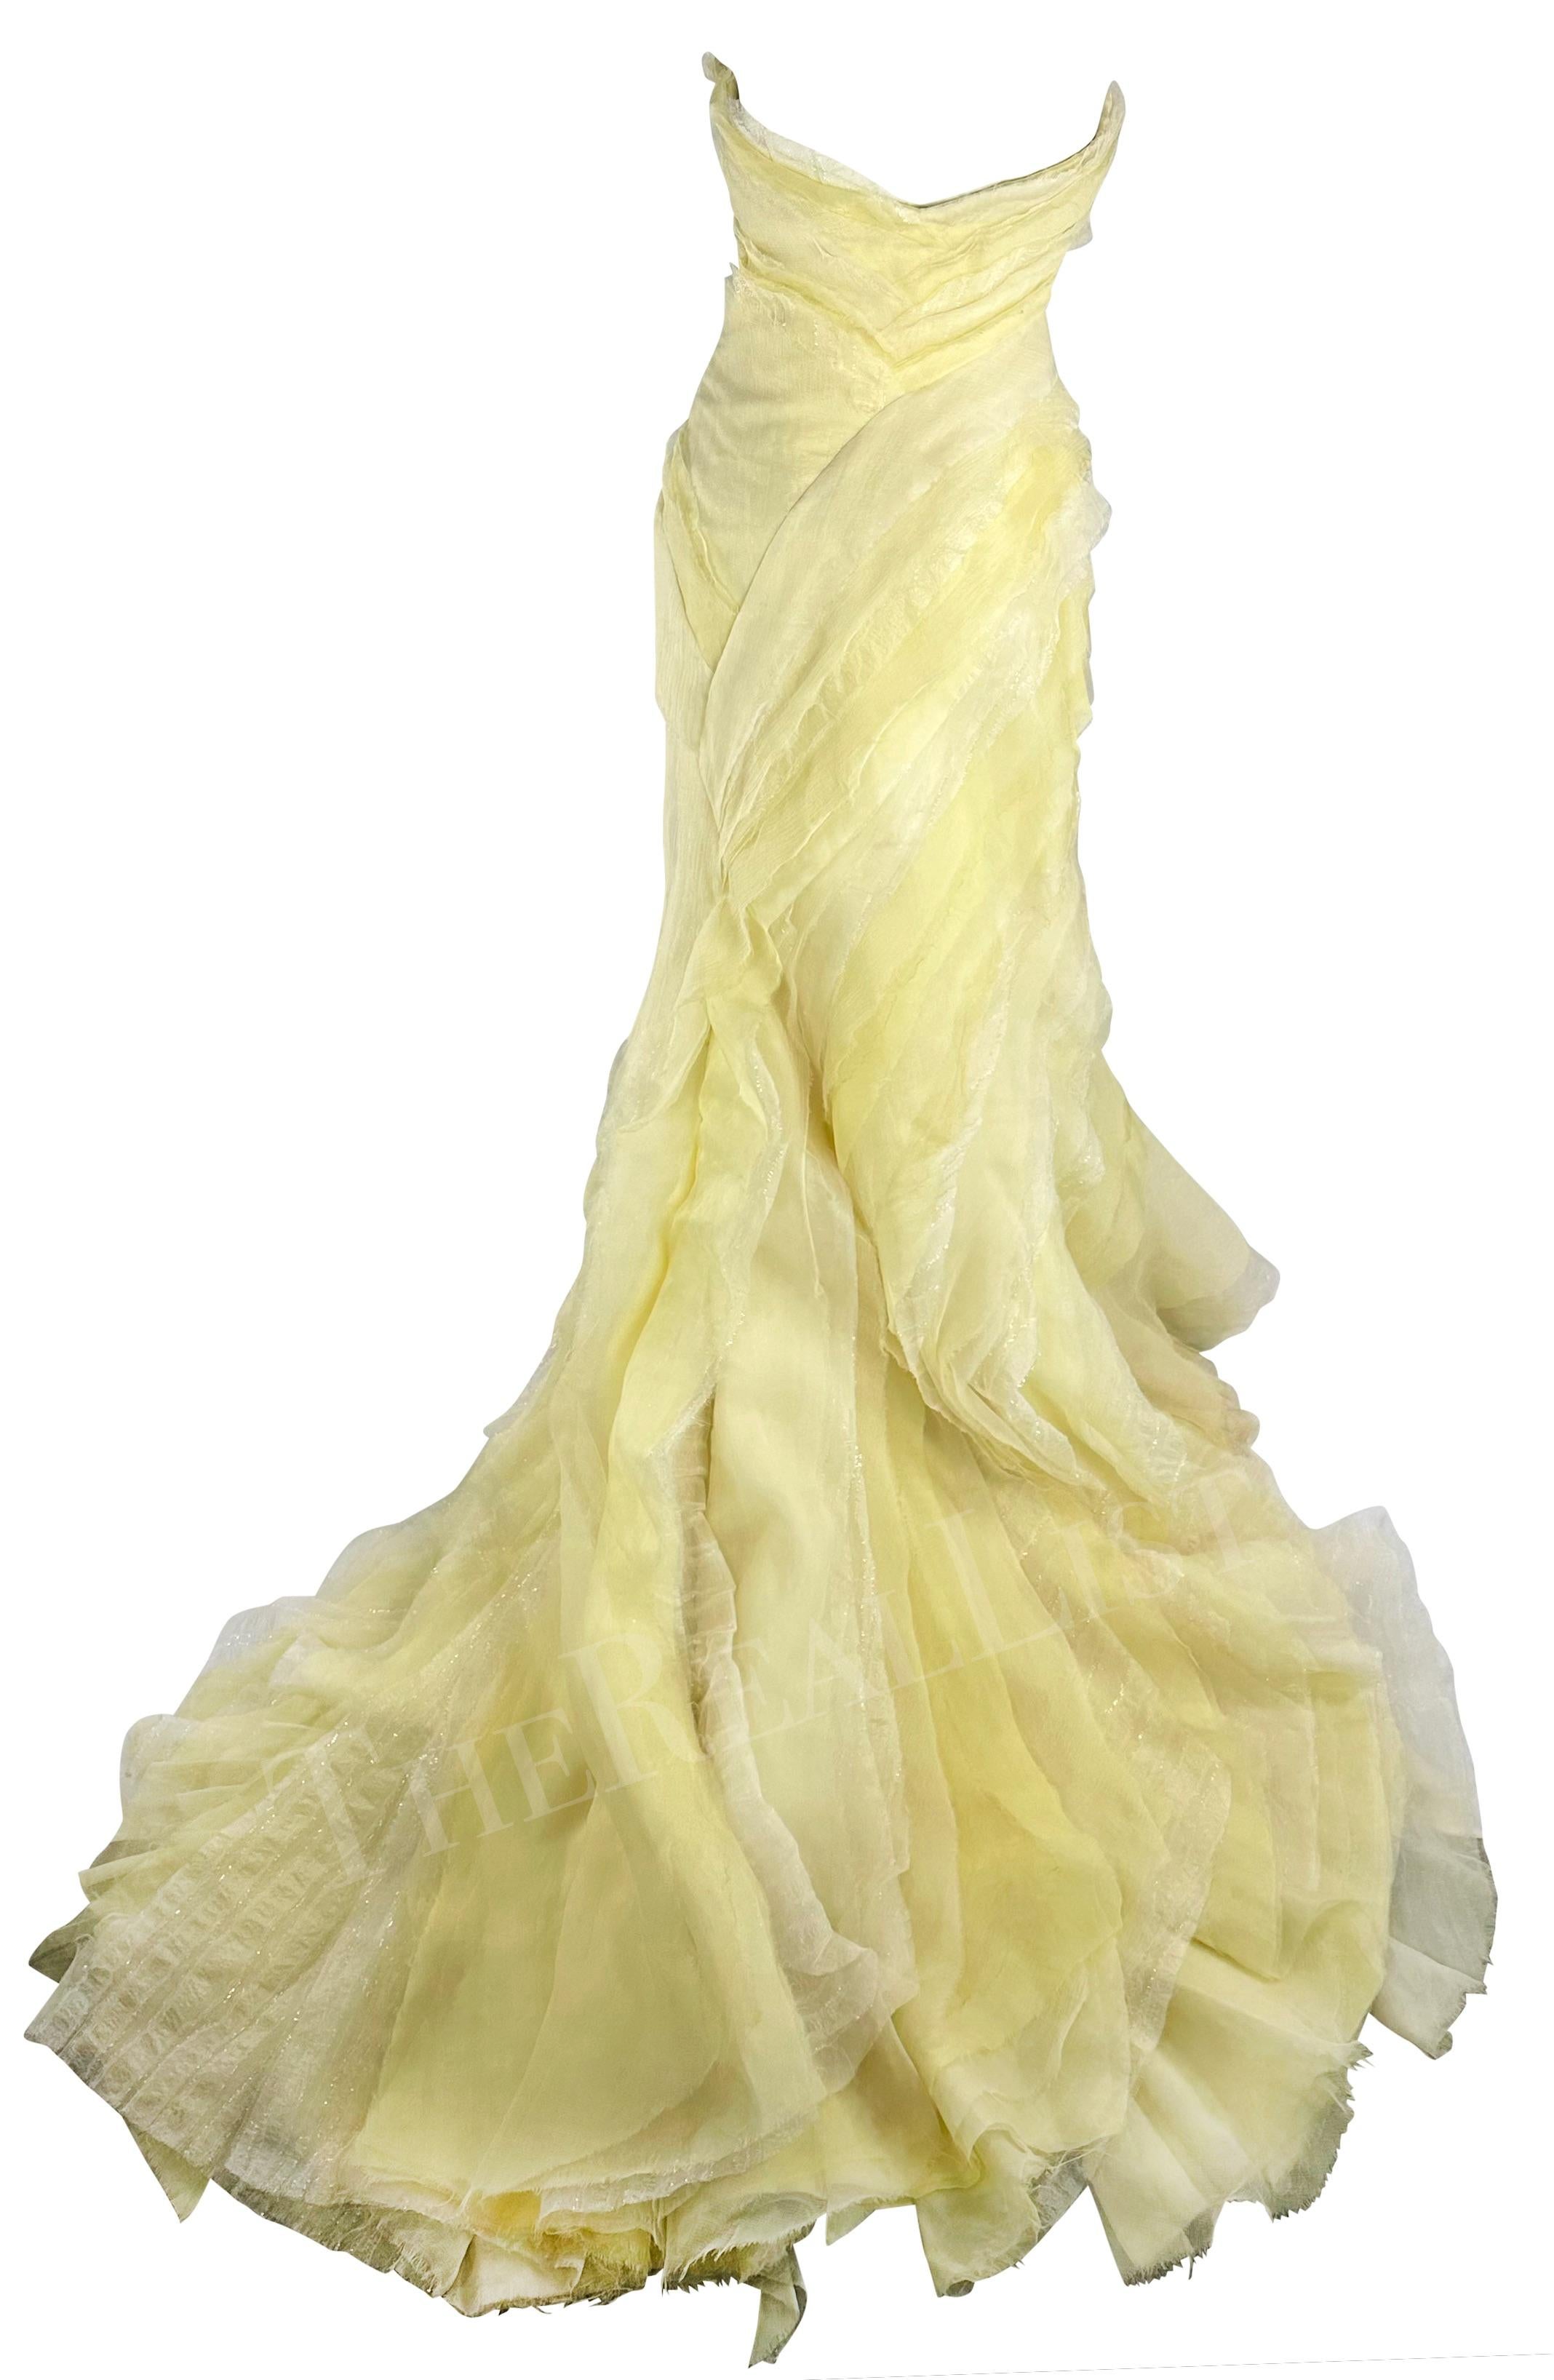 2010 Roberto Cavalli Custom Red Carpet Pastel Canary Yellow Tulle Gown Train For Sale 4